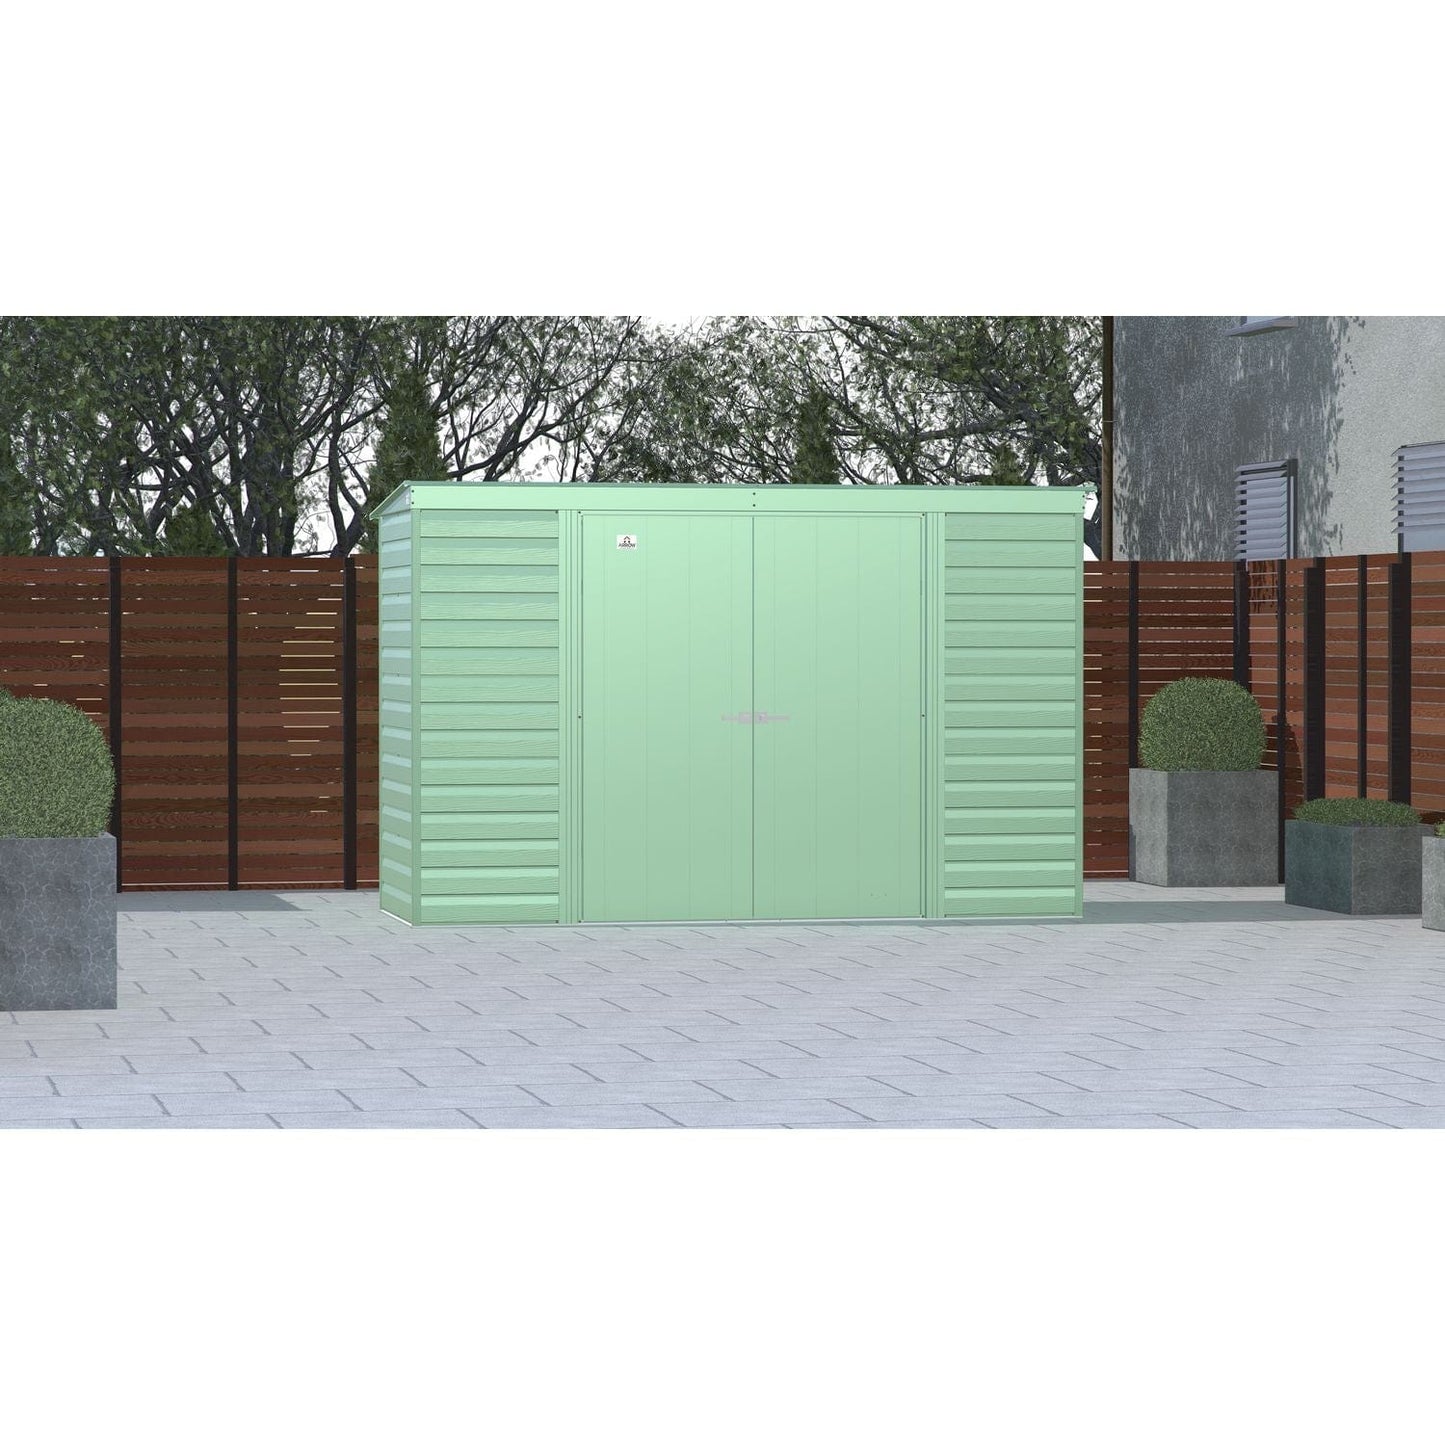 Arrow Sheds & Storage Buildings Arrow | Select Pent Roof Steel Storage Shed, 10x4 ft., Sage Green SCP104SG